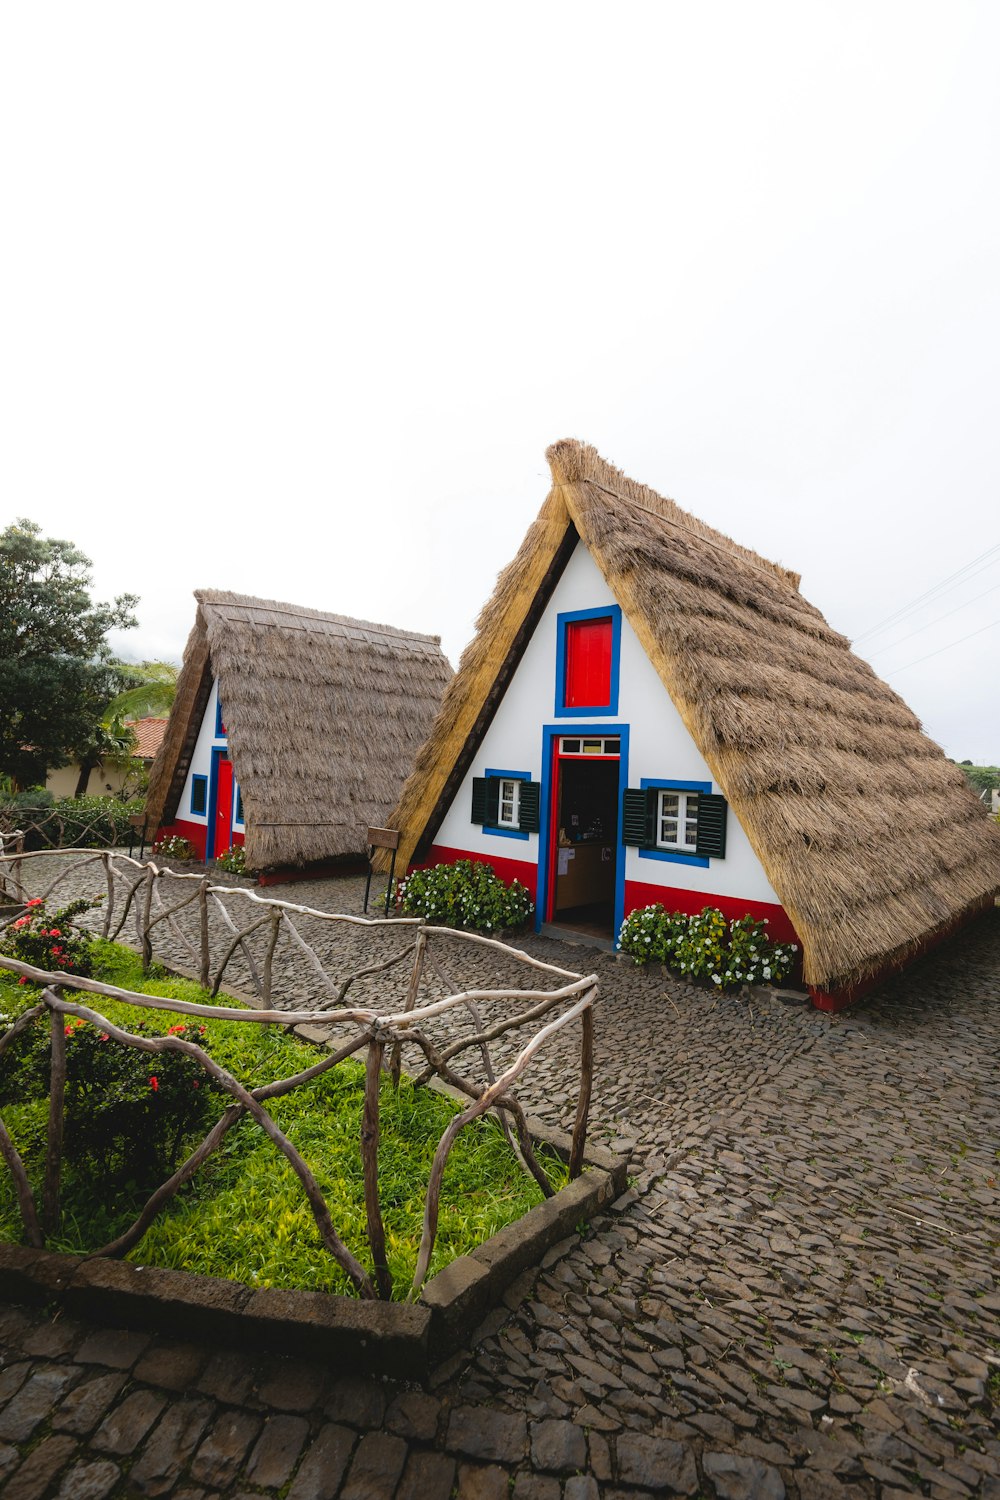 a row of thatched roof houses on a cobblestone road